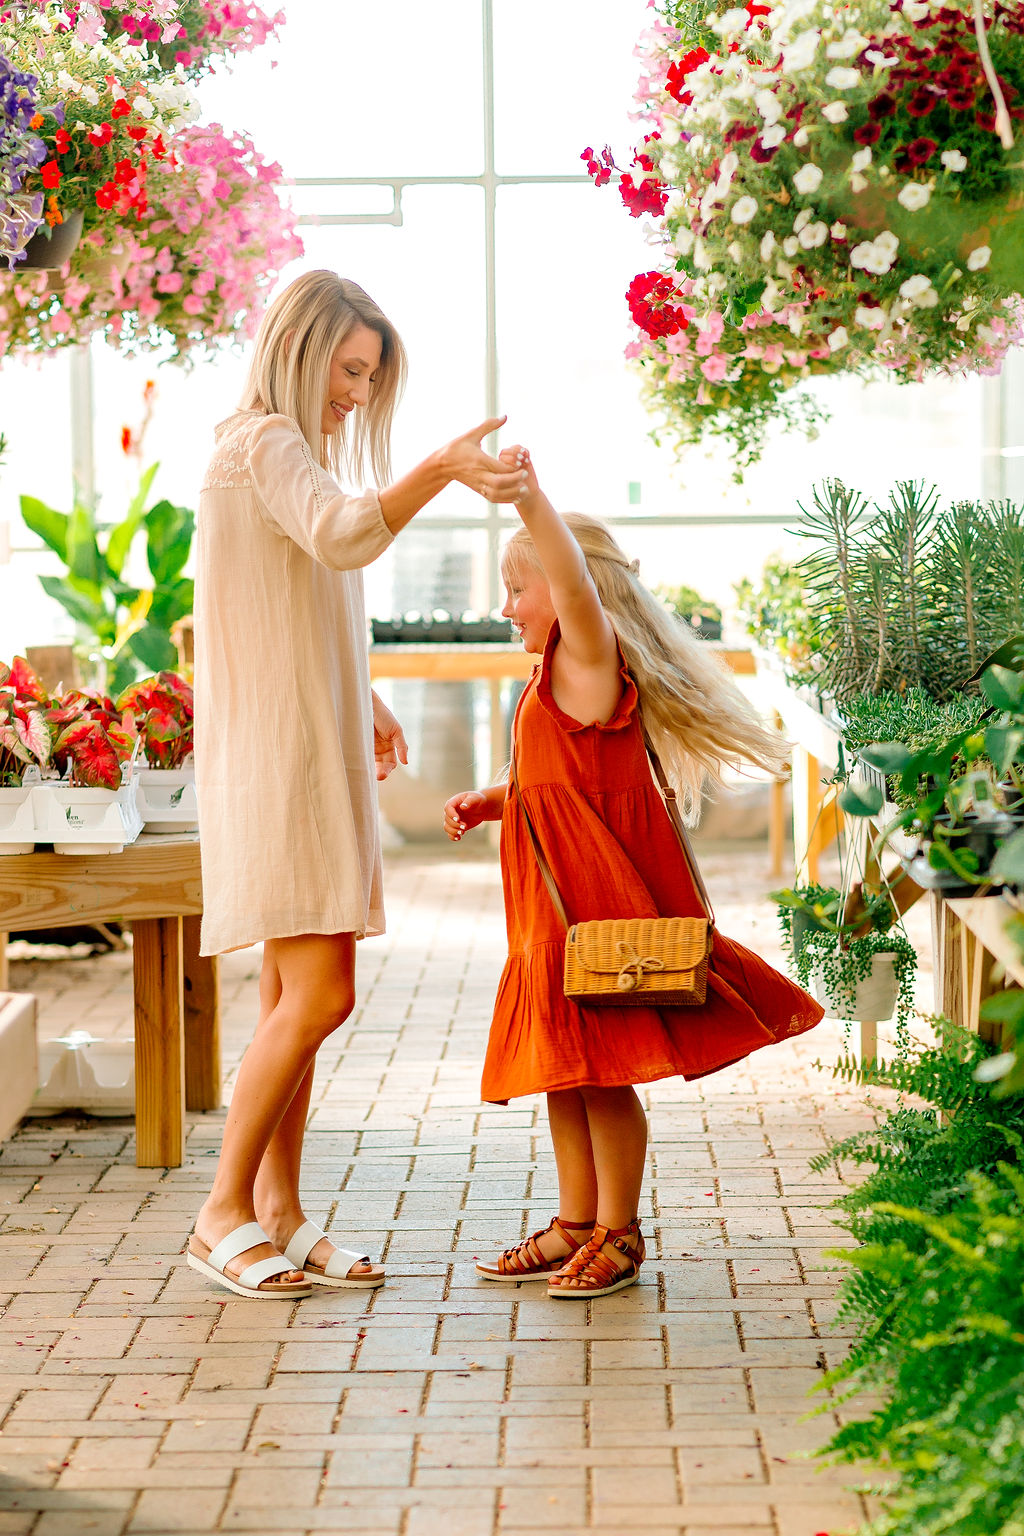 A mom dances with her young daughter in a greenhouse full of hanging flowers